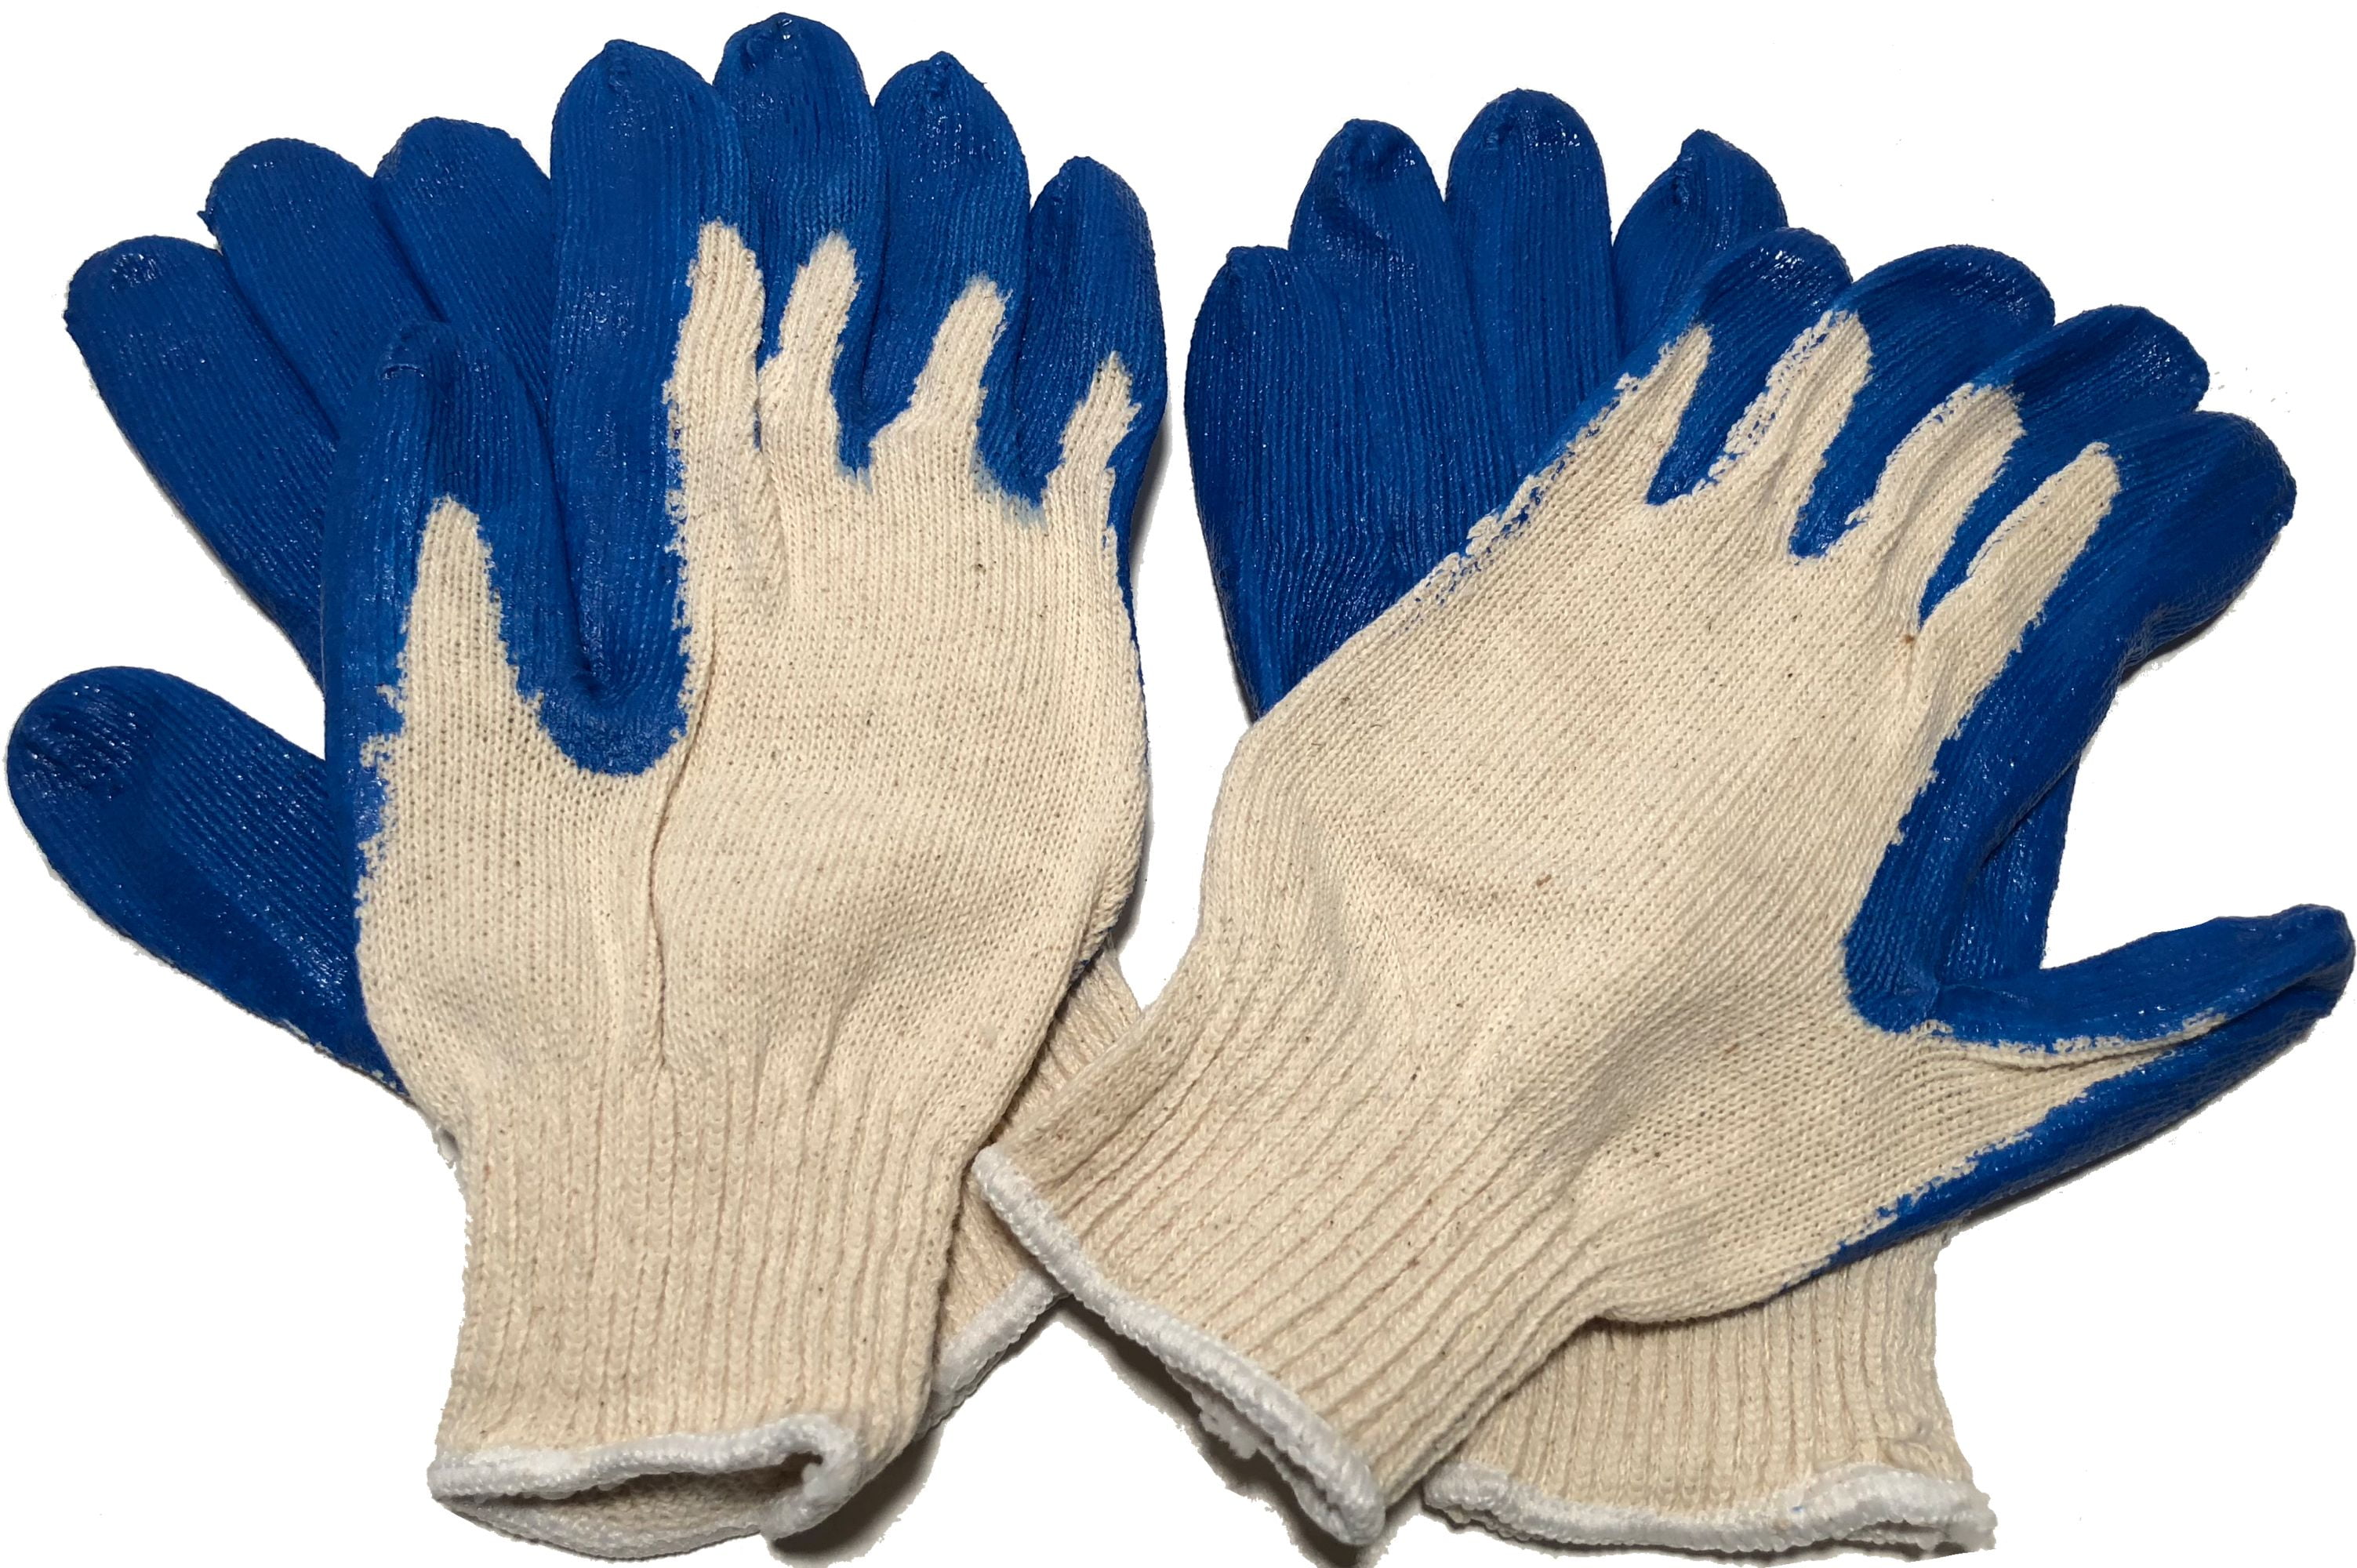 Machingers Quilting Gloves for Free-Motion Sewing